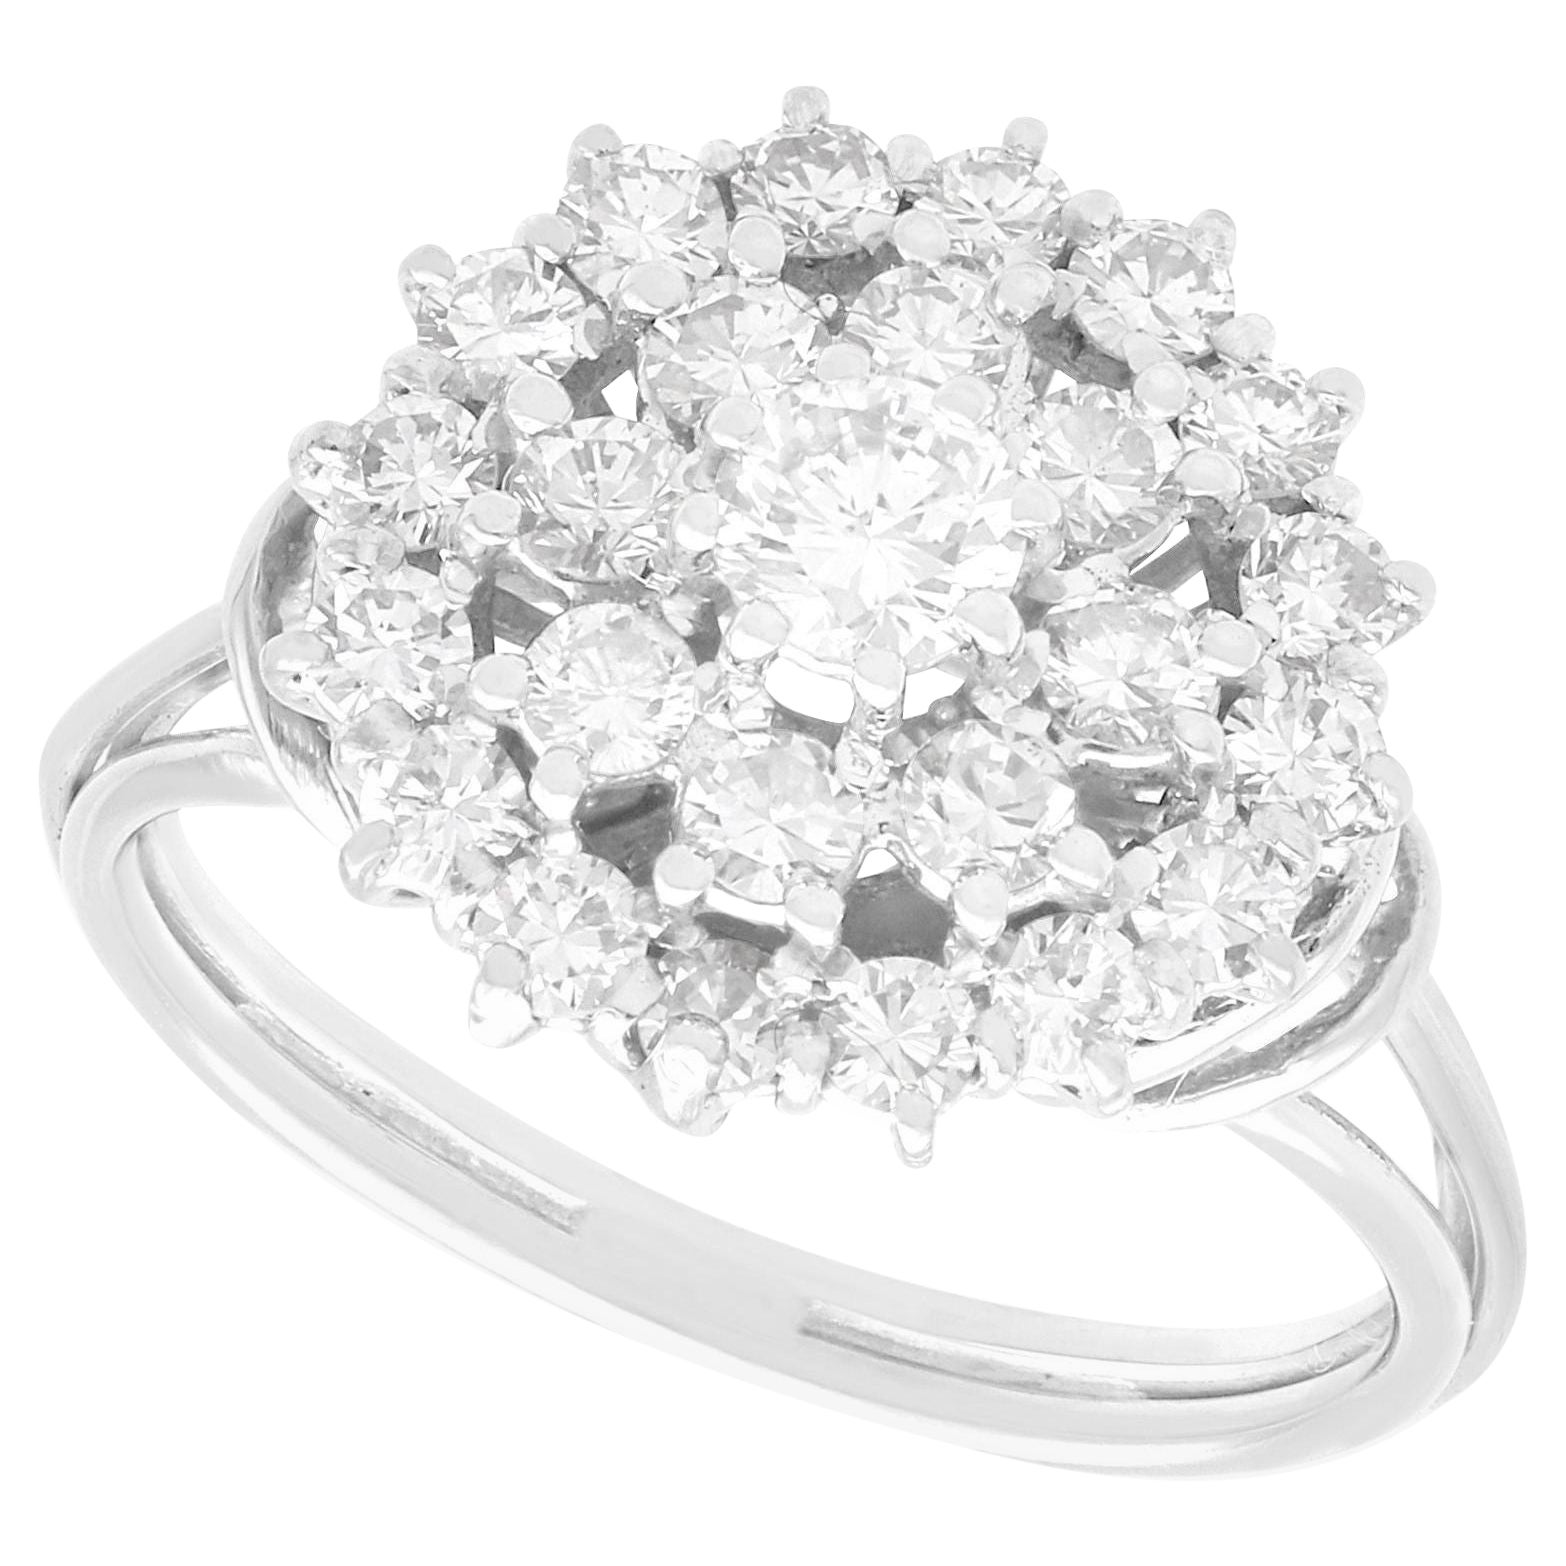 Vintage 1.51ct Diamond and 18ct White Gold Cluster Ring For Sale